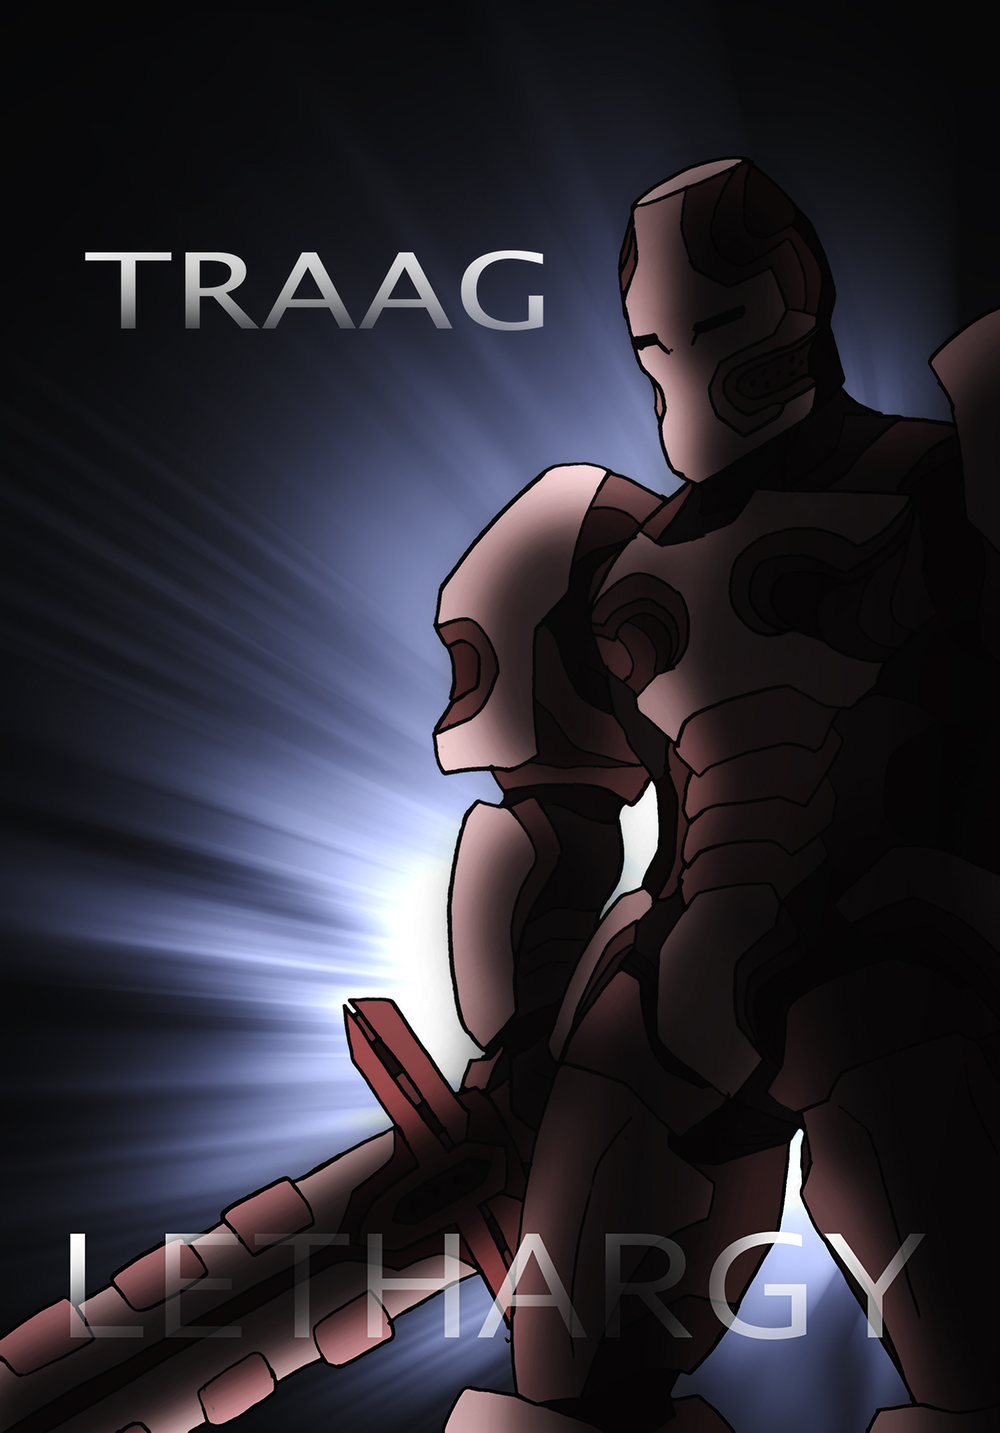 traag_poster_2_by_nickinamerica-d9vleis.